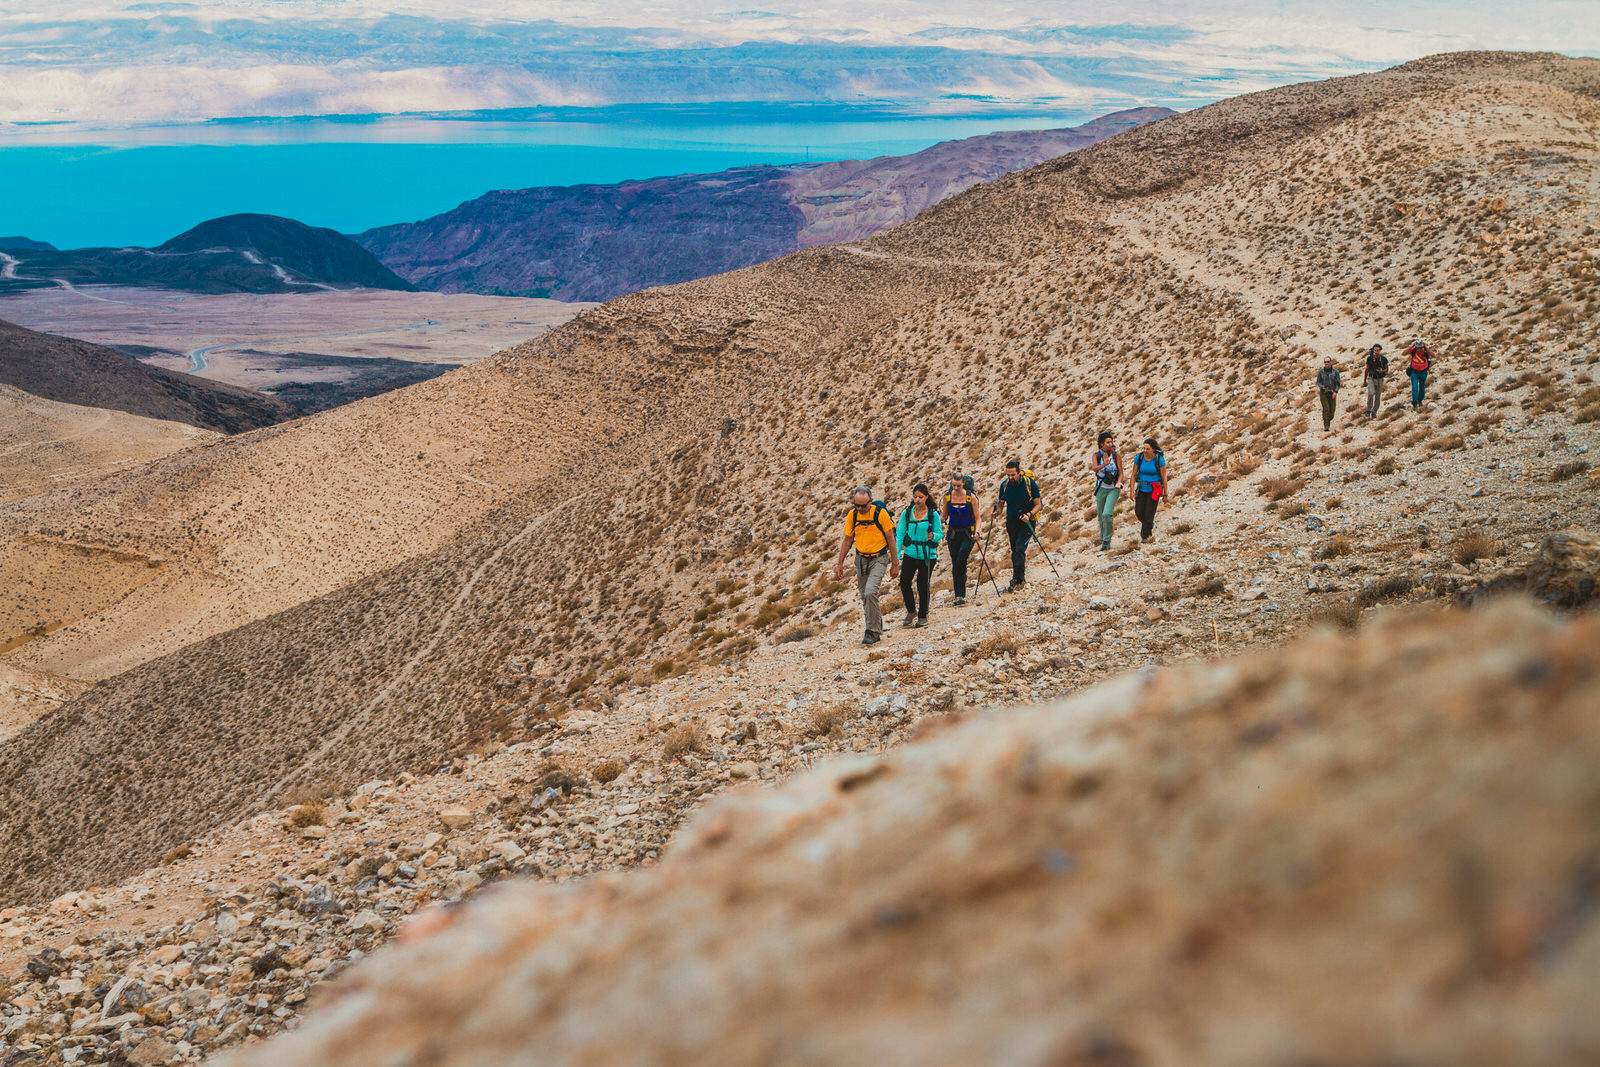 Hiking the Jordan Trail, the Middle 